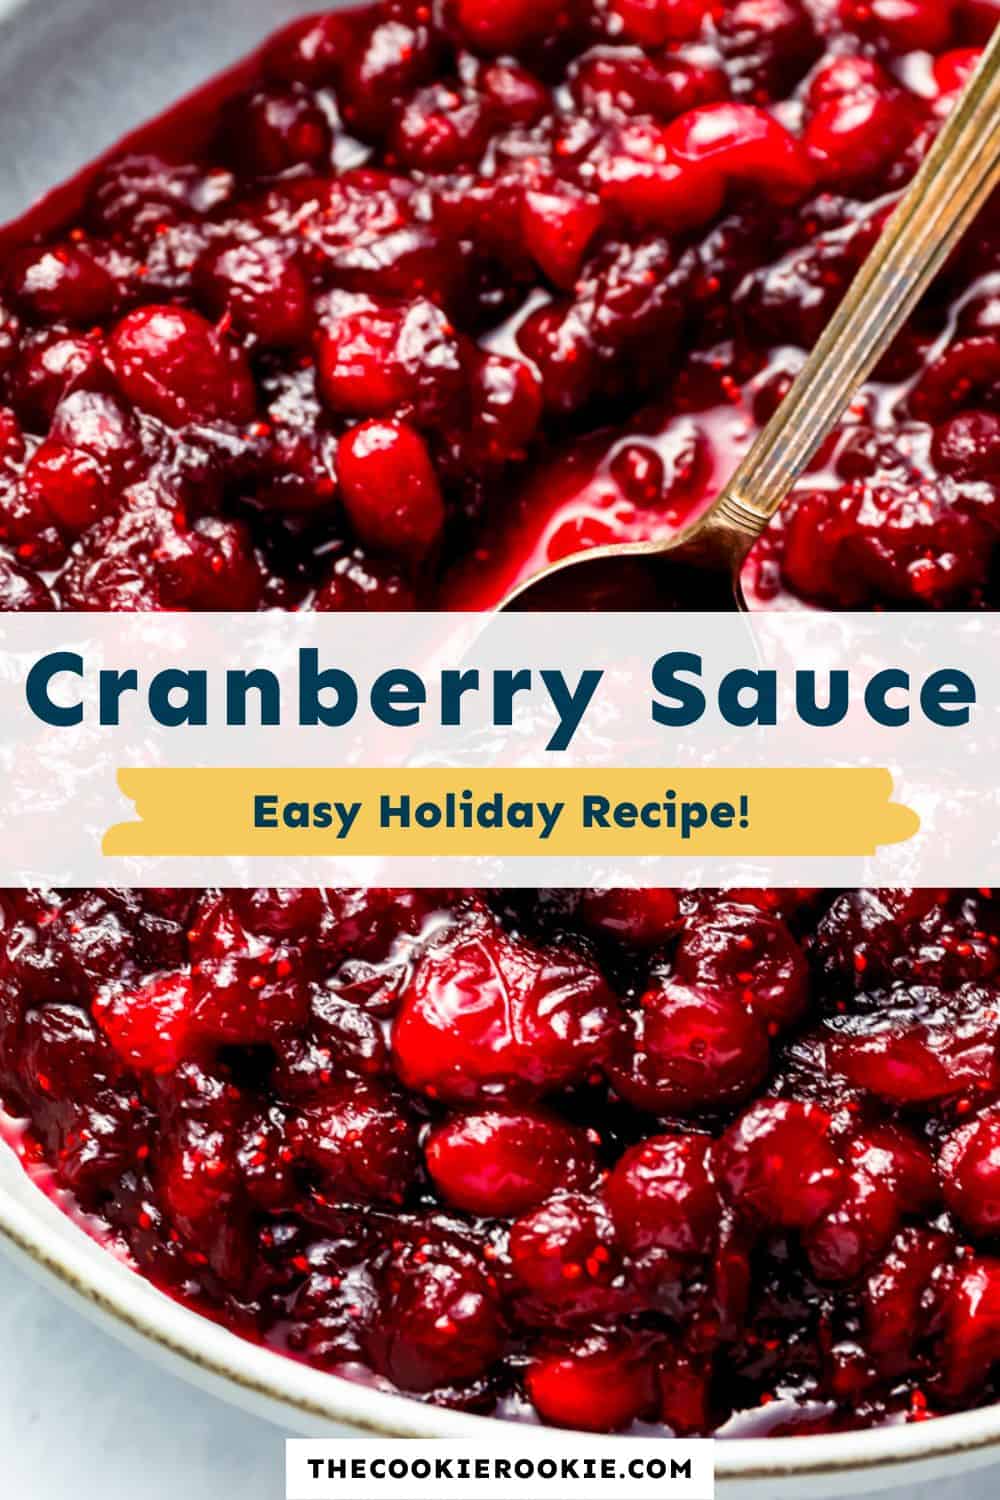 Cranberry Sauce Recipe - The Cookie Rookie®